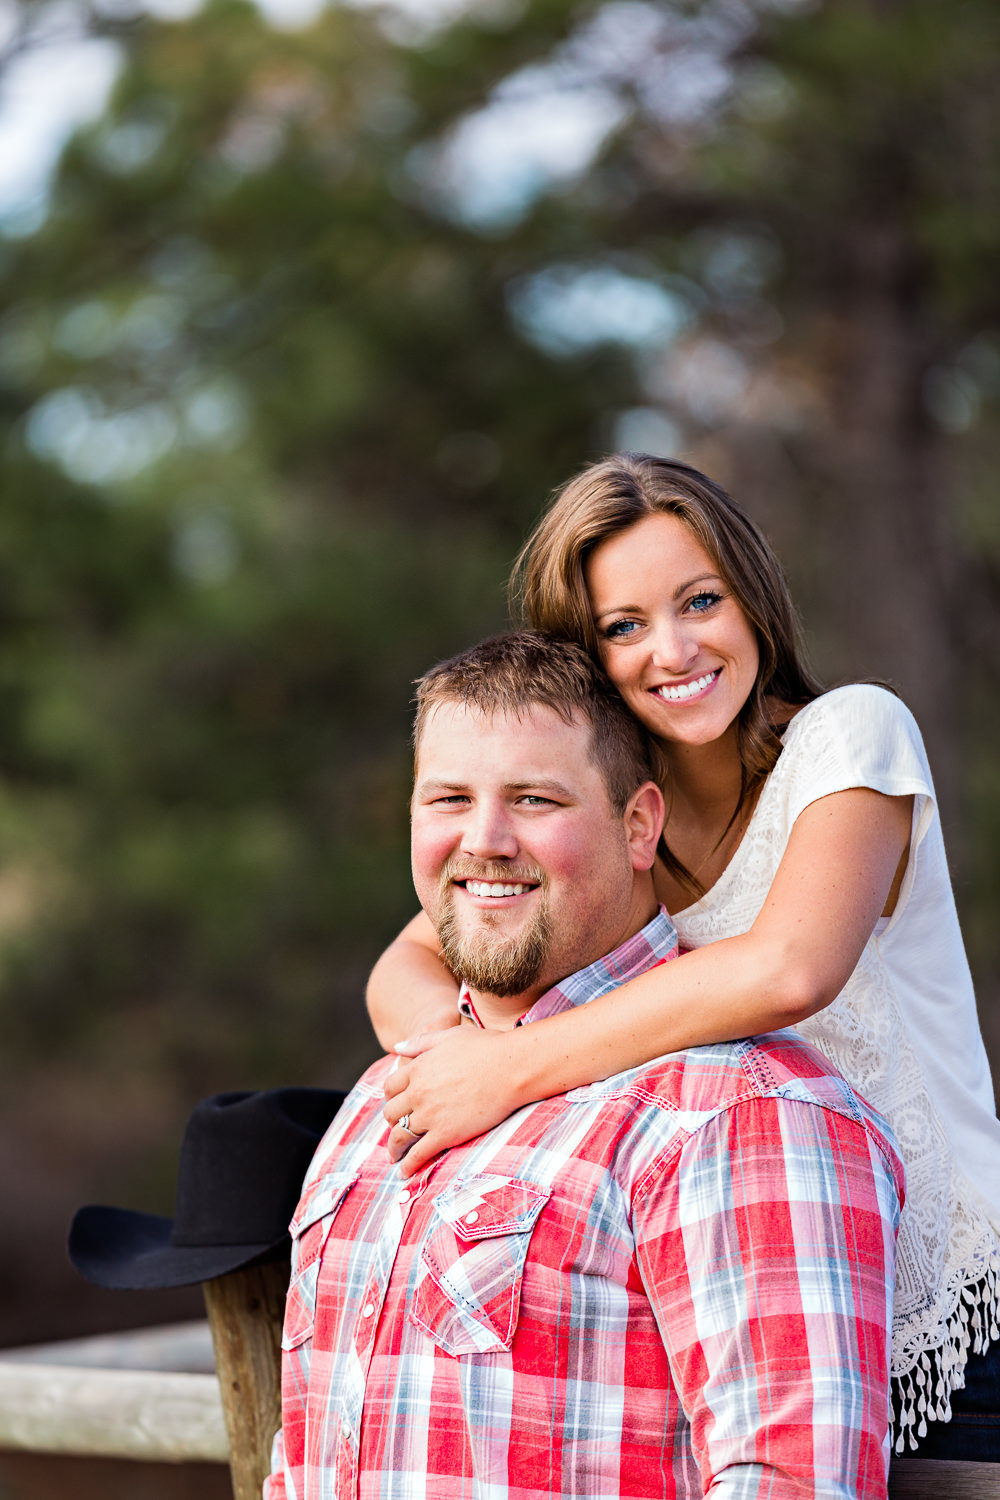 billings-montana-engagement-session-woman-stands-on-fence-behind-man.jpg